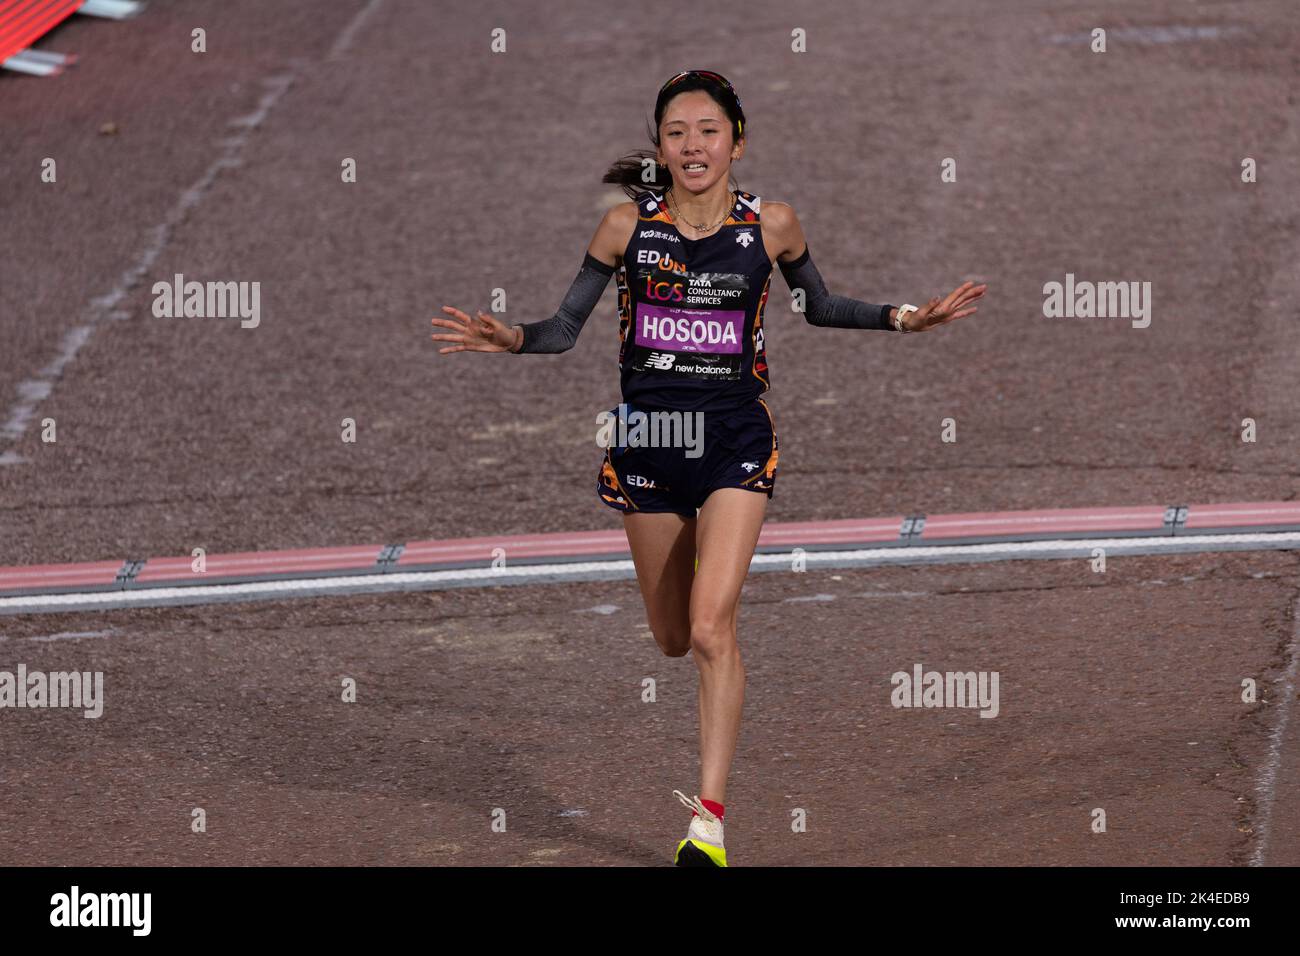 LONDON, ENGLAND - 02 OCTOBER 2022: Ai Hosoda of Japan celebrates as she finishes the Women's Elite race during the 2022 TCS London Marathon at the Mall on 2nd October, 2022 in London, England. Credit: SMP News / Alamy Live News Stock Photo